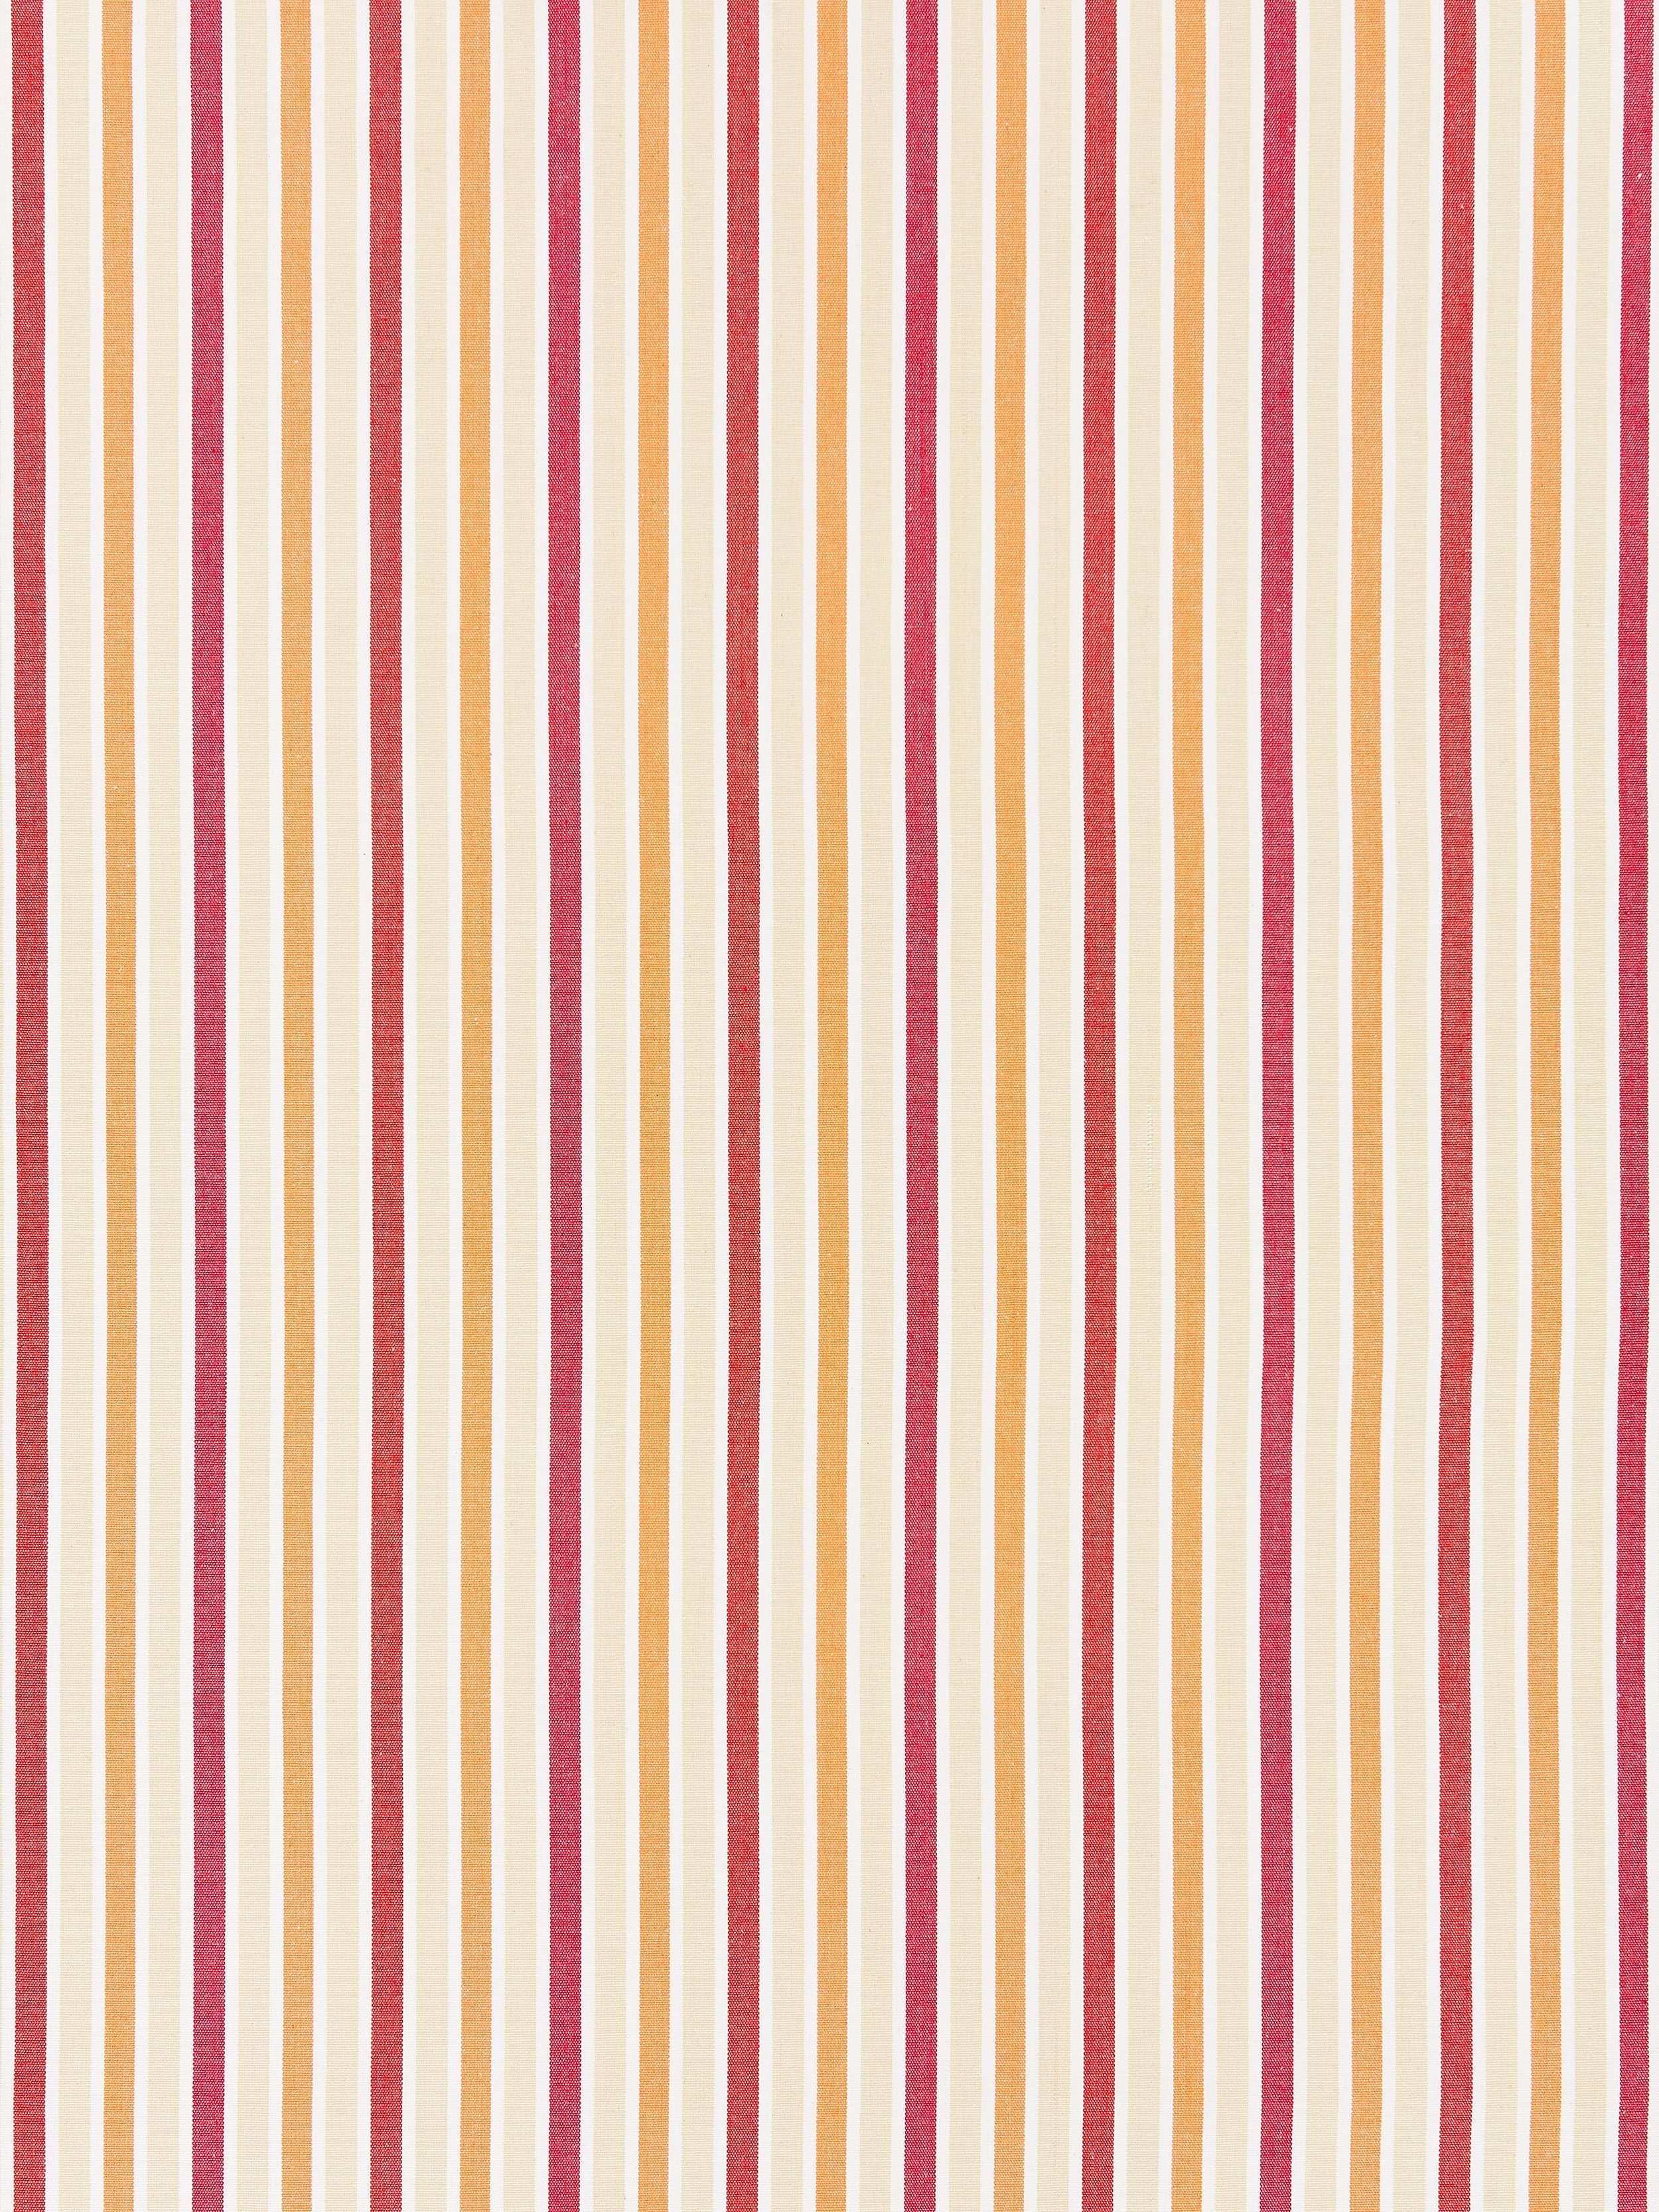 Leeds Cotton Stripe fabric in coral color - pattern number SC 000227114 - by Scalamandre in the Scalamandre Fabrics Book 1 collection